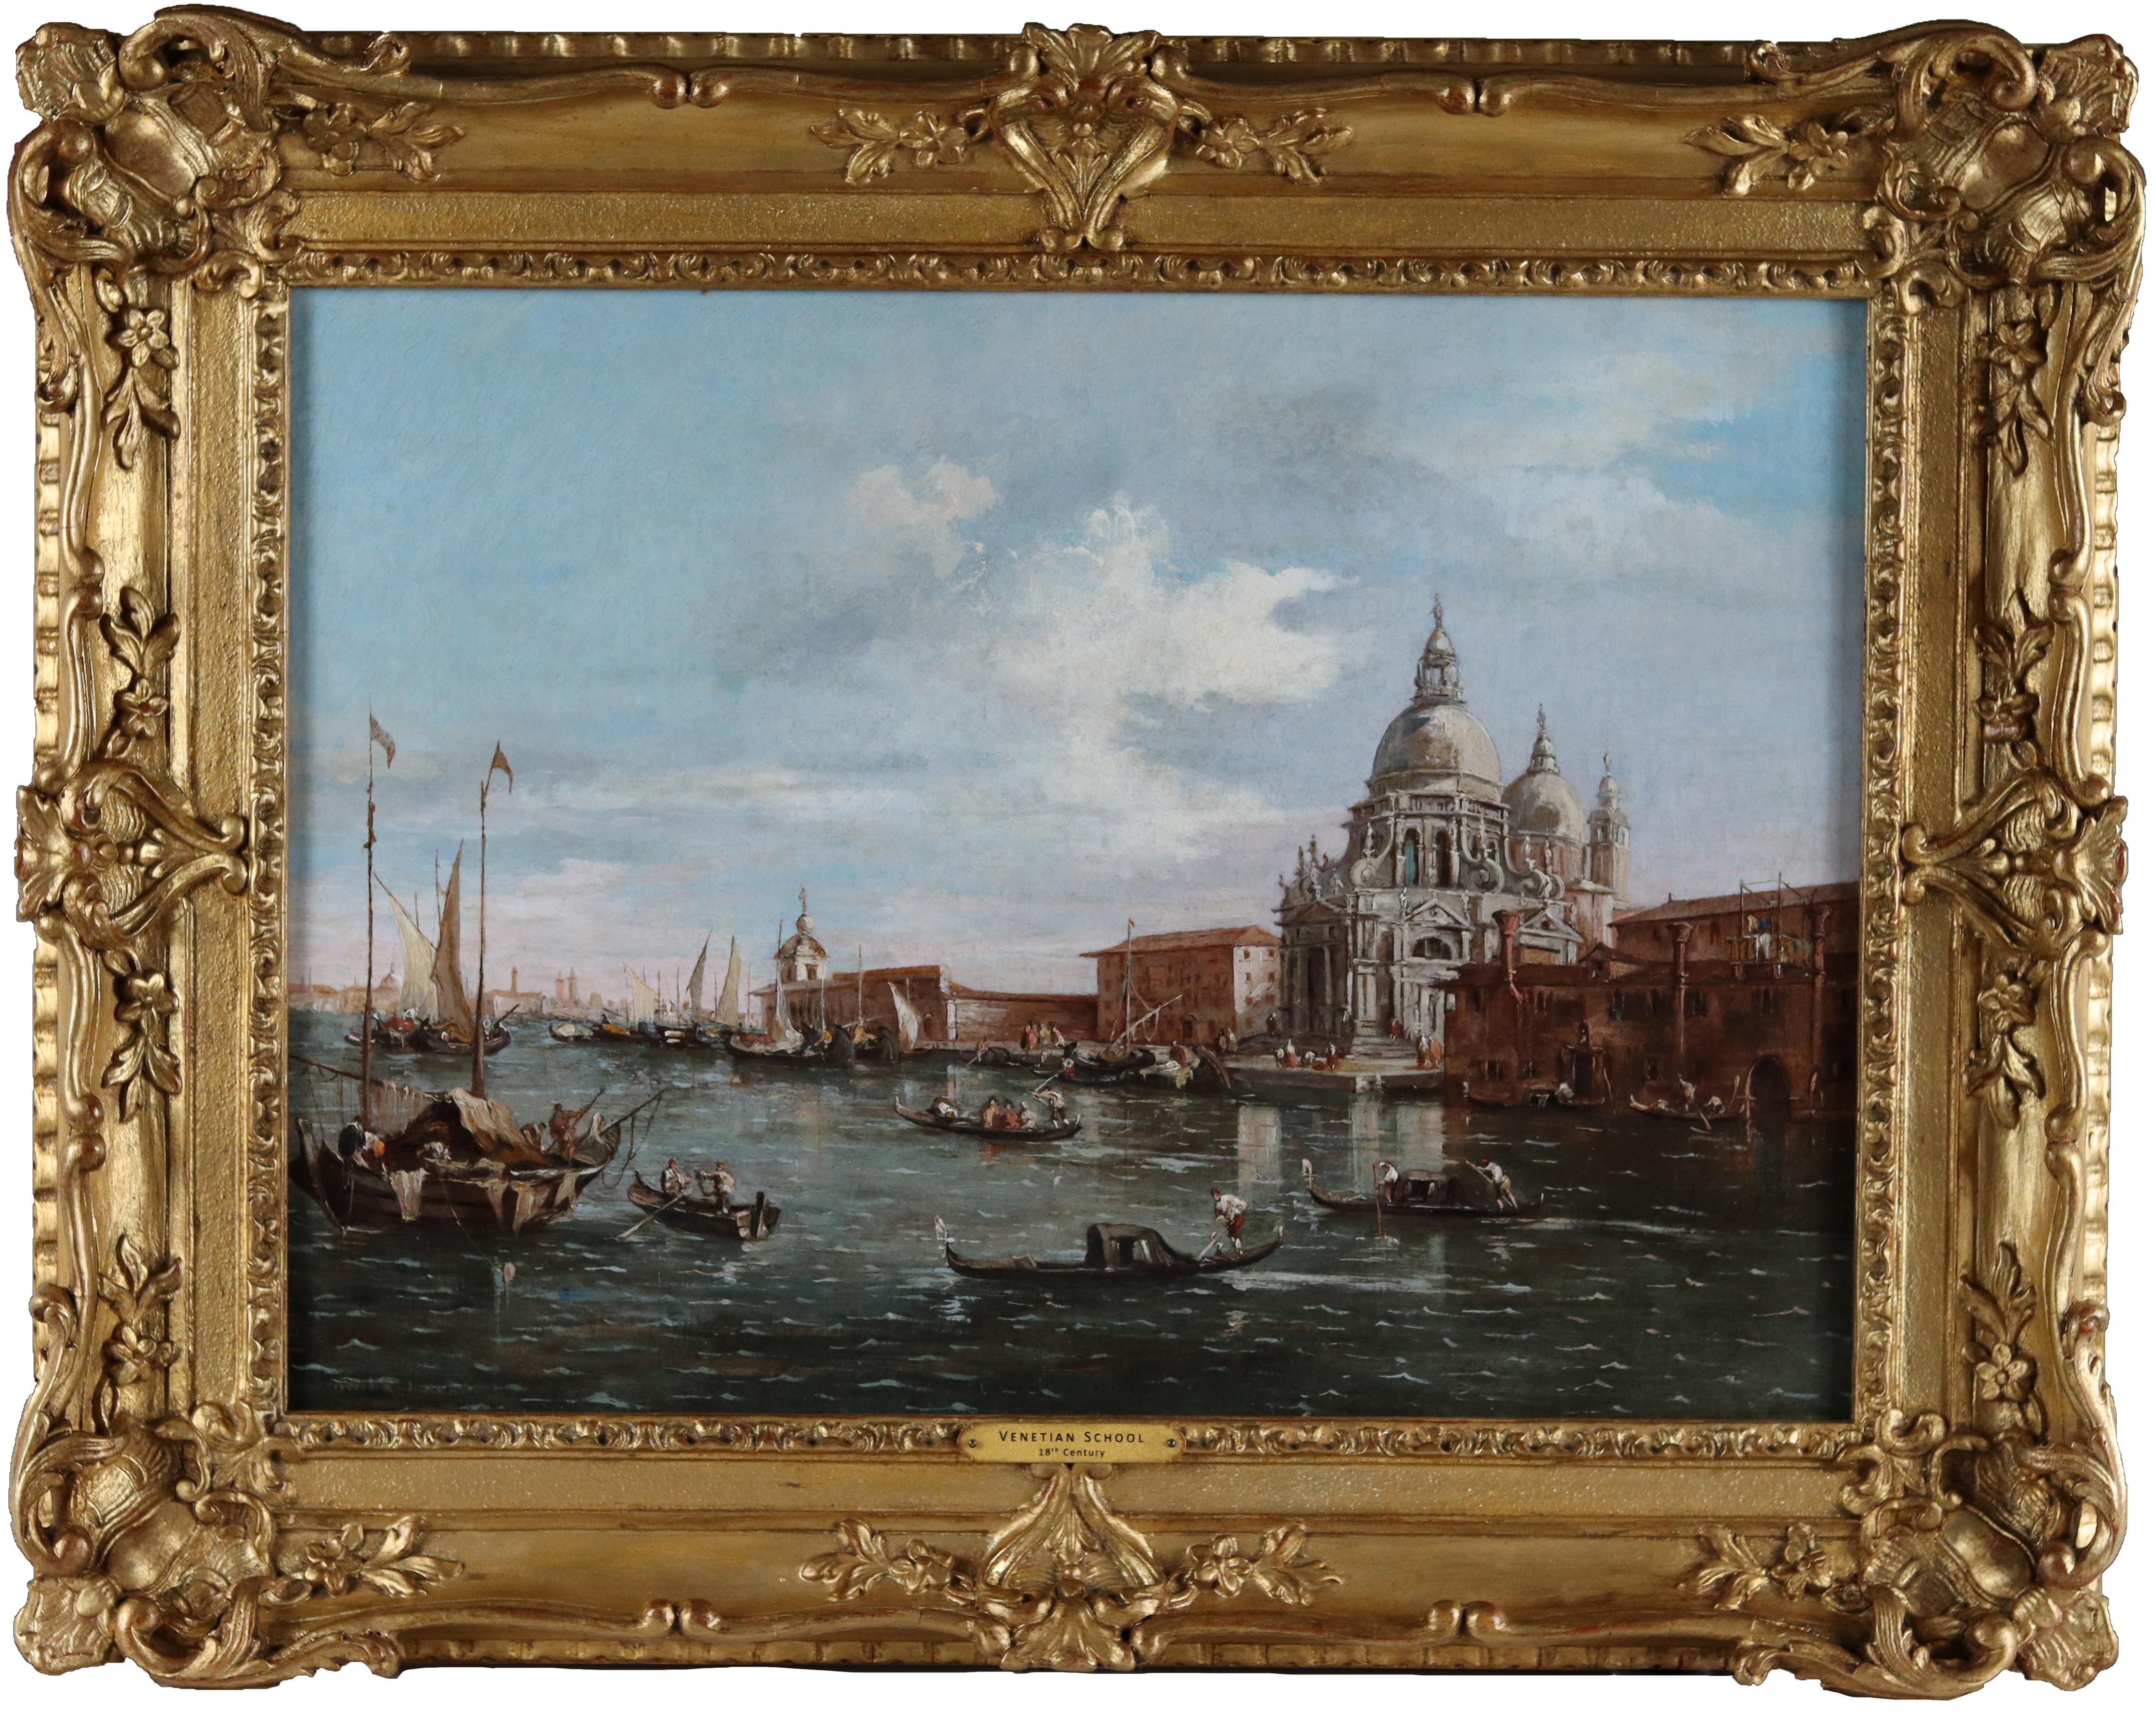 A Pair of 18th century Venetian Canal Scenes in the Style of Francesco Guardi   - Old Masters Painting by 18th Century Italian School